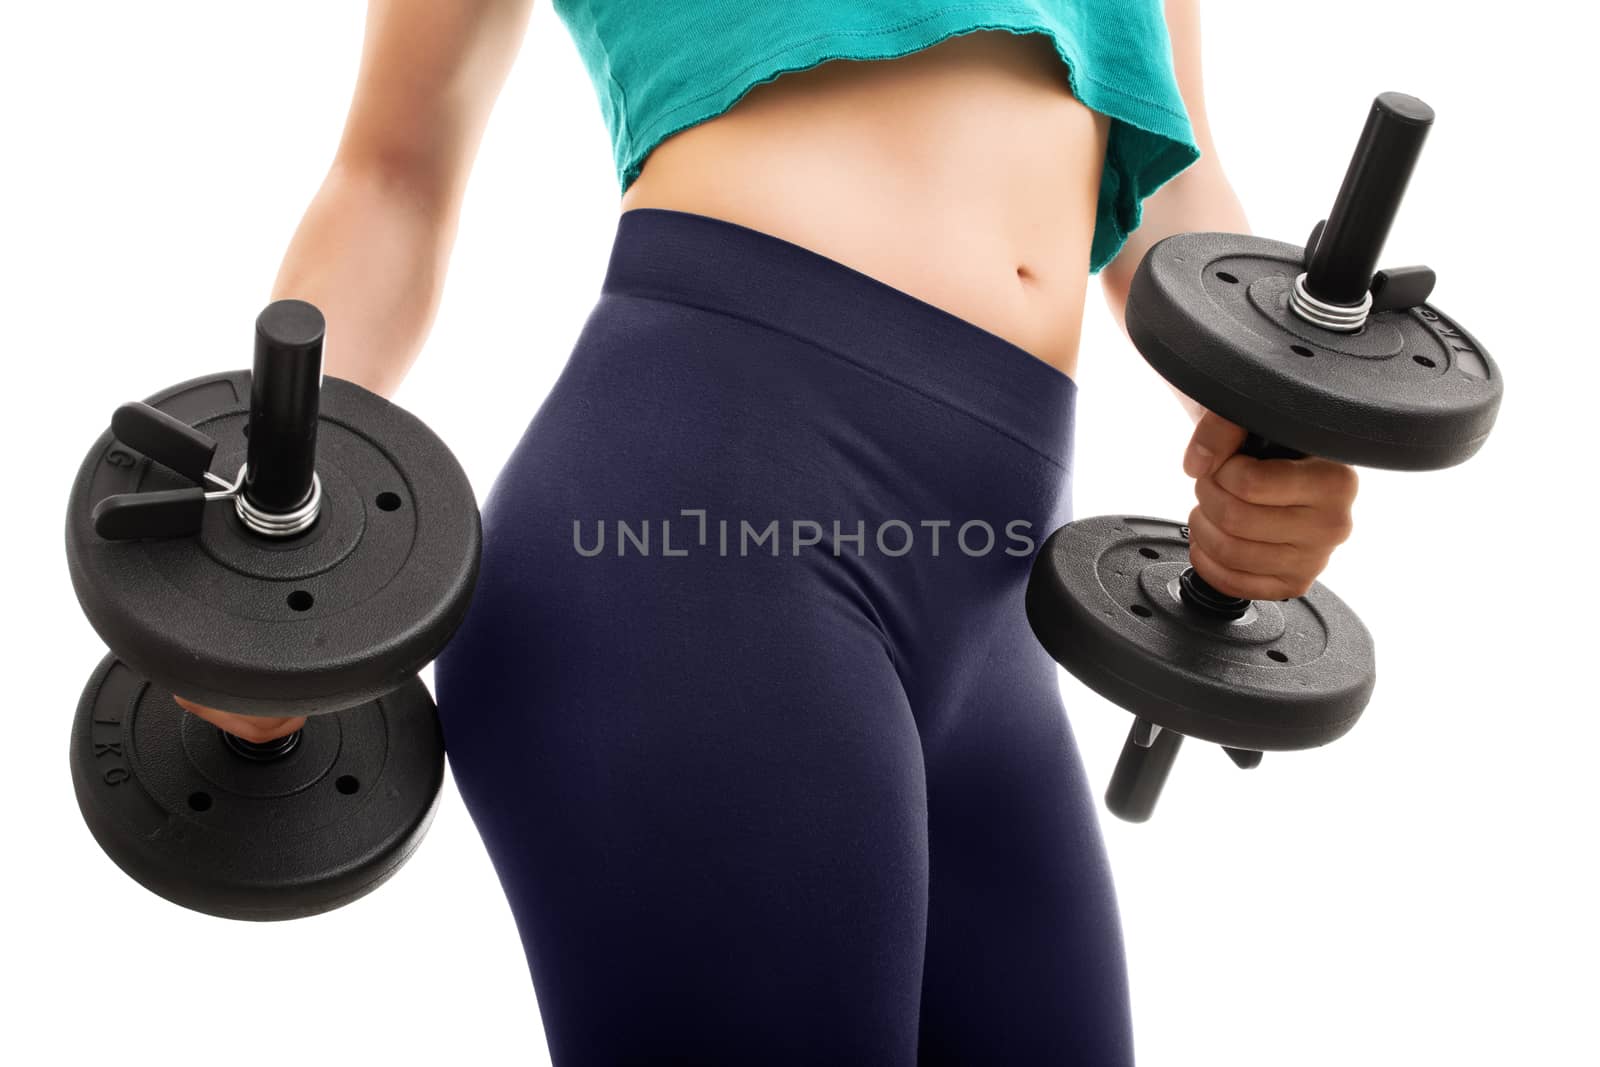 Lifting weights. You need to work for it. Young girl holding dumbbells, isolated on white background.